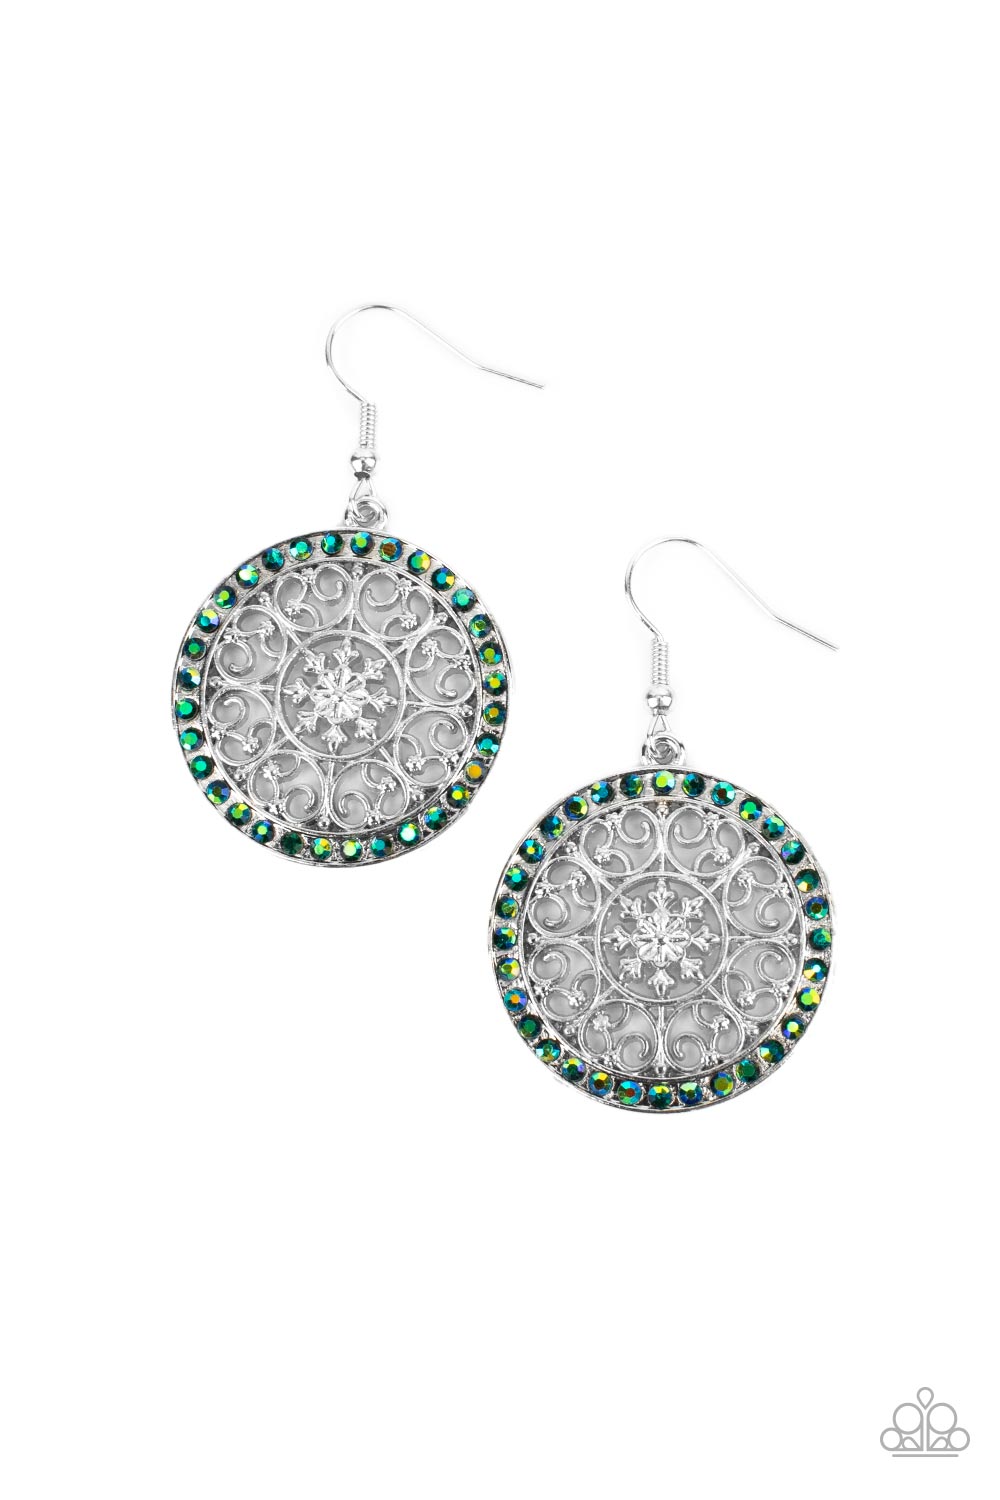 Bollywood Ballroom - Green Iridescent Earrings infused with a border of iridescent green rhinestones, studded silver heart shape filigree fans out from a decorative silver floral center for a whimsical look. Earring attaches to a standard fishhook fitting.  Sold as one pair of earrings.  Paparazzi Jewelry is lead and nickel free so it's perfect for sensitive skin too!